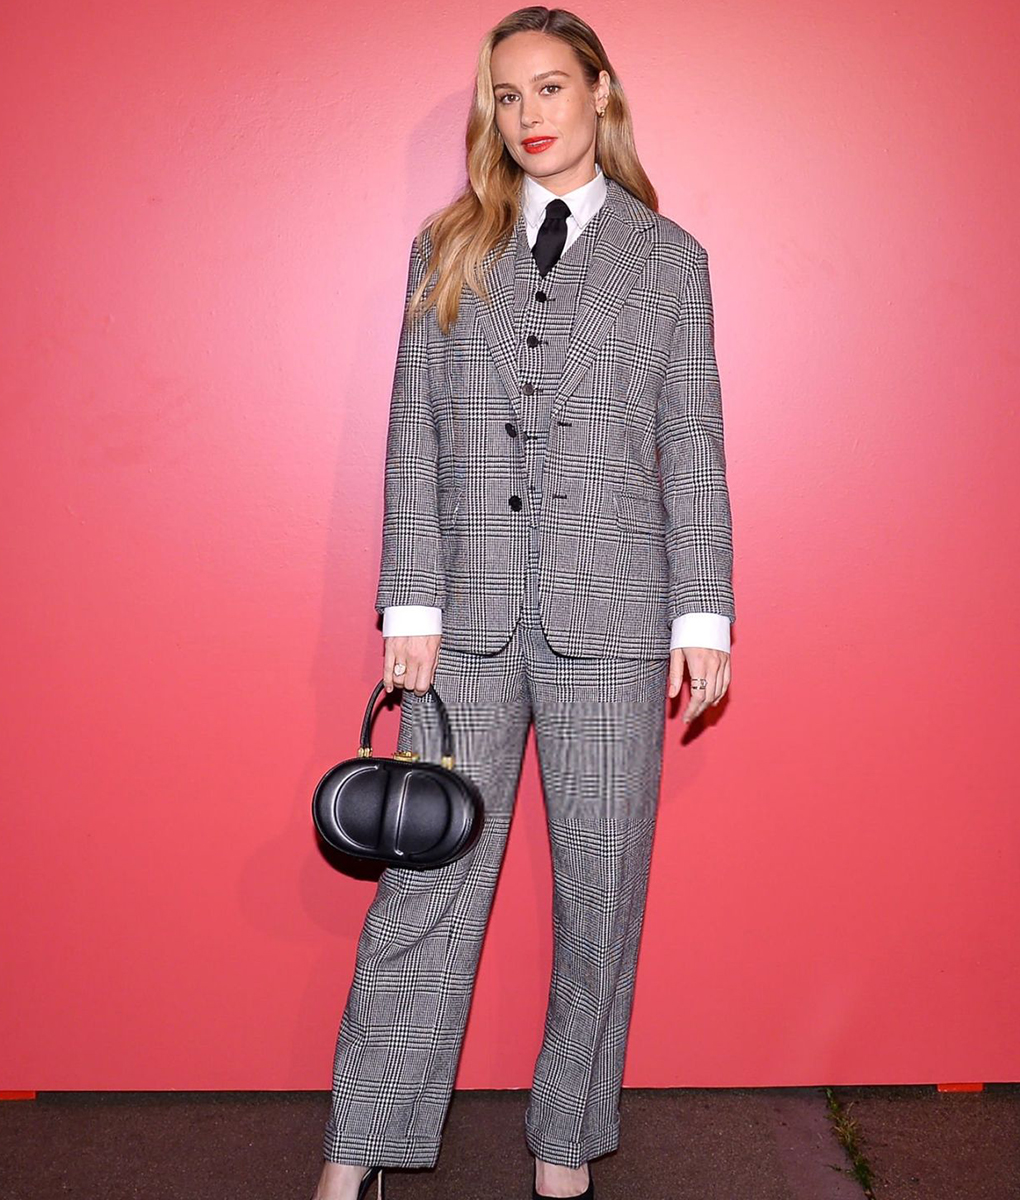 Brie Larson Houndstooth Suit (3)